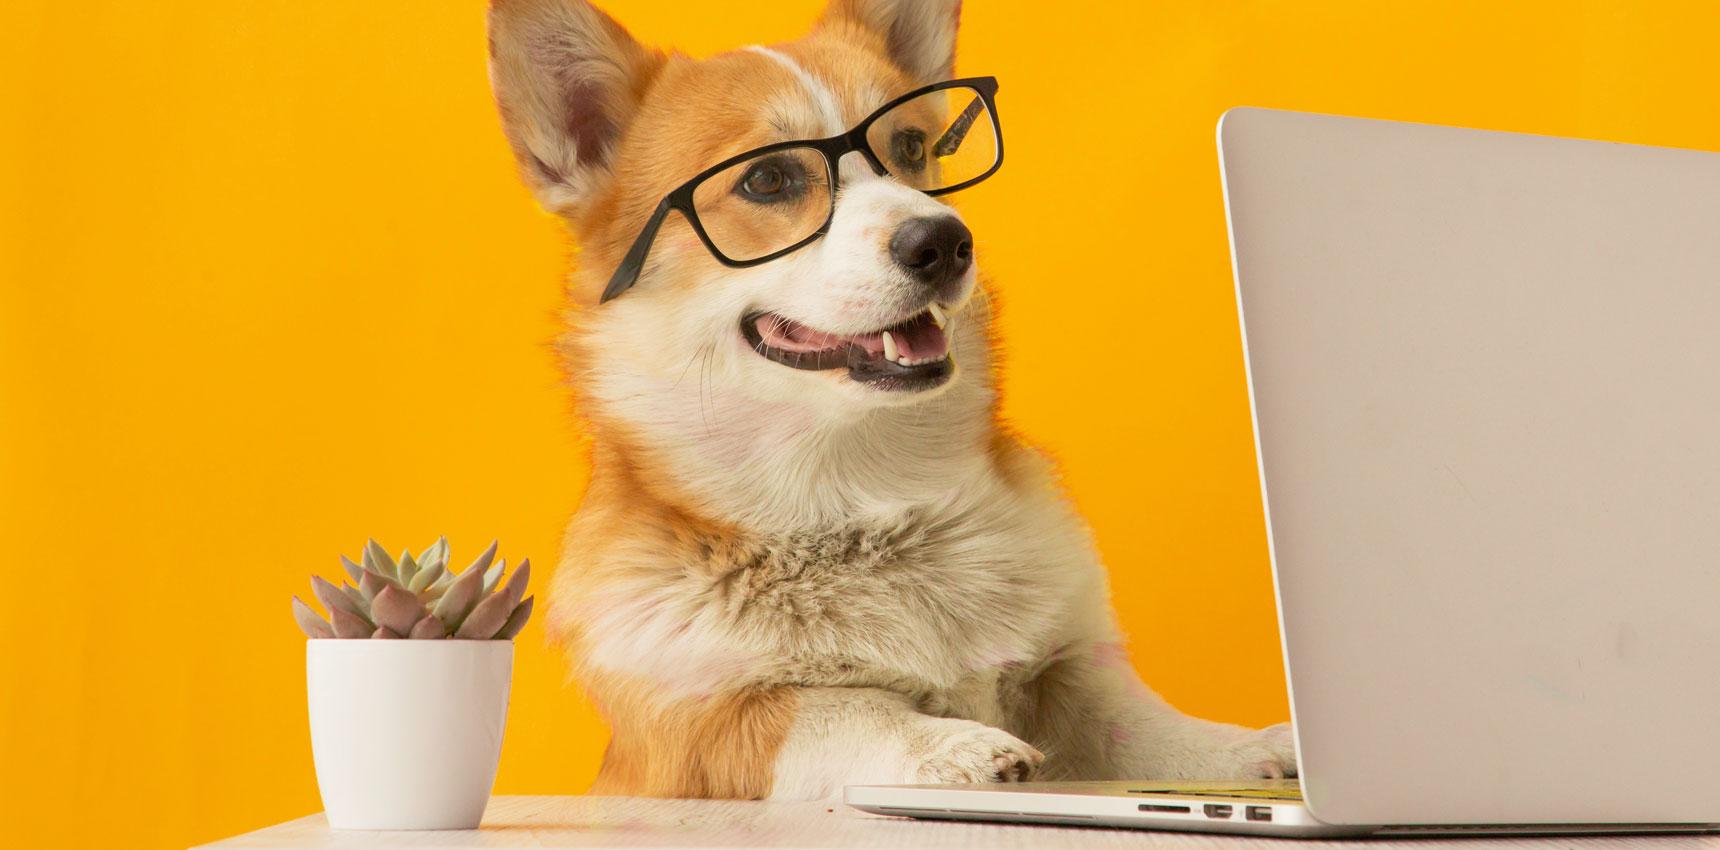 Dog wearing glasses sits at a desk with a laptop